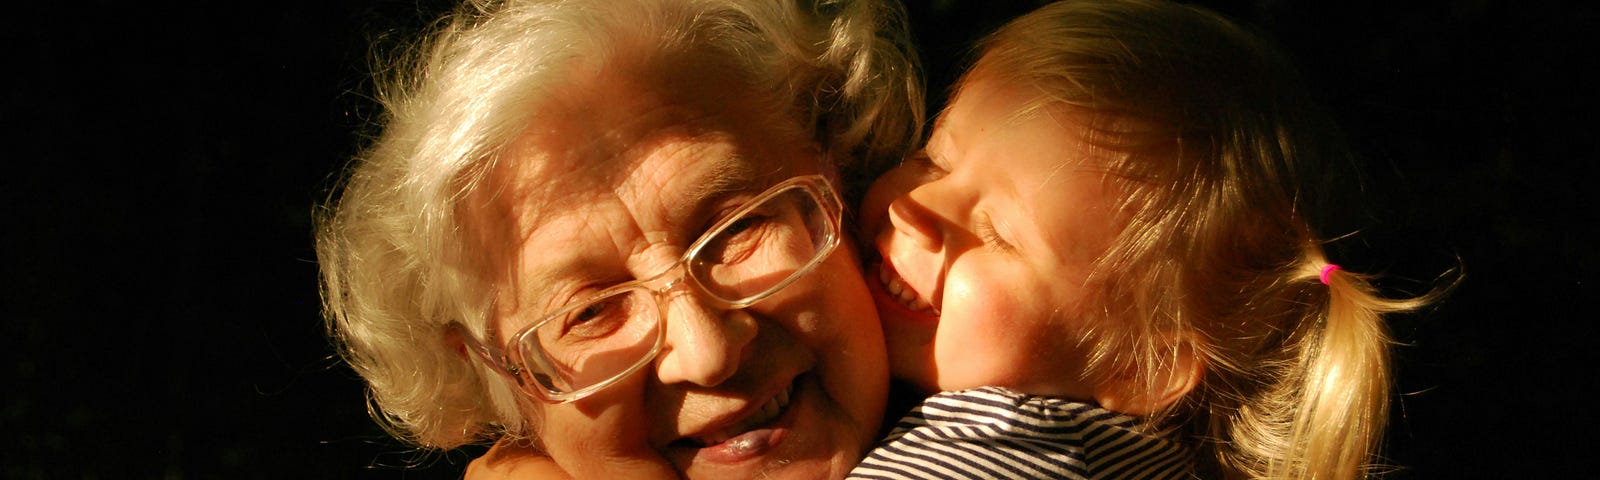 Grandma hugging blonde haired two year old girl on dark background with light shining on their faces.